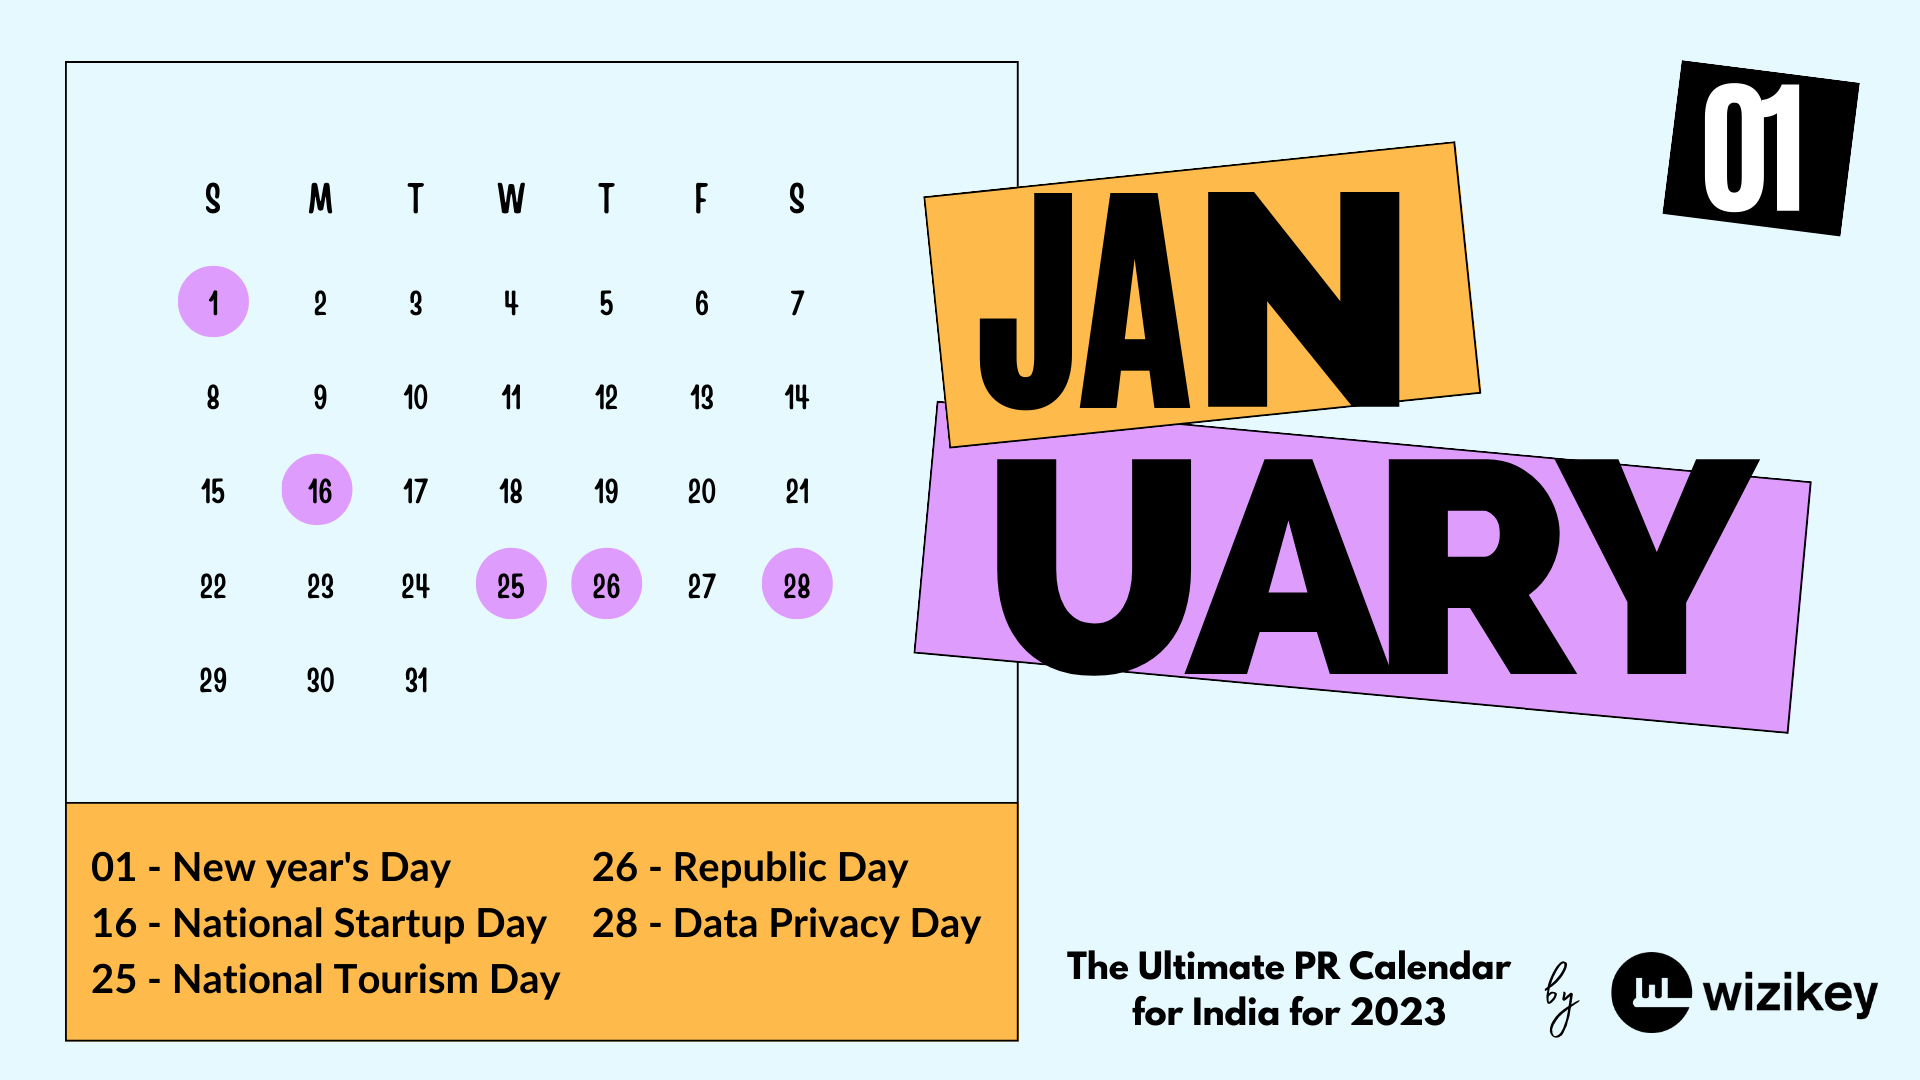 Key PR events for January 2023